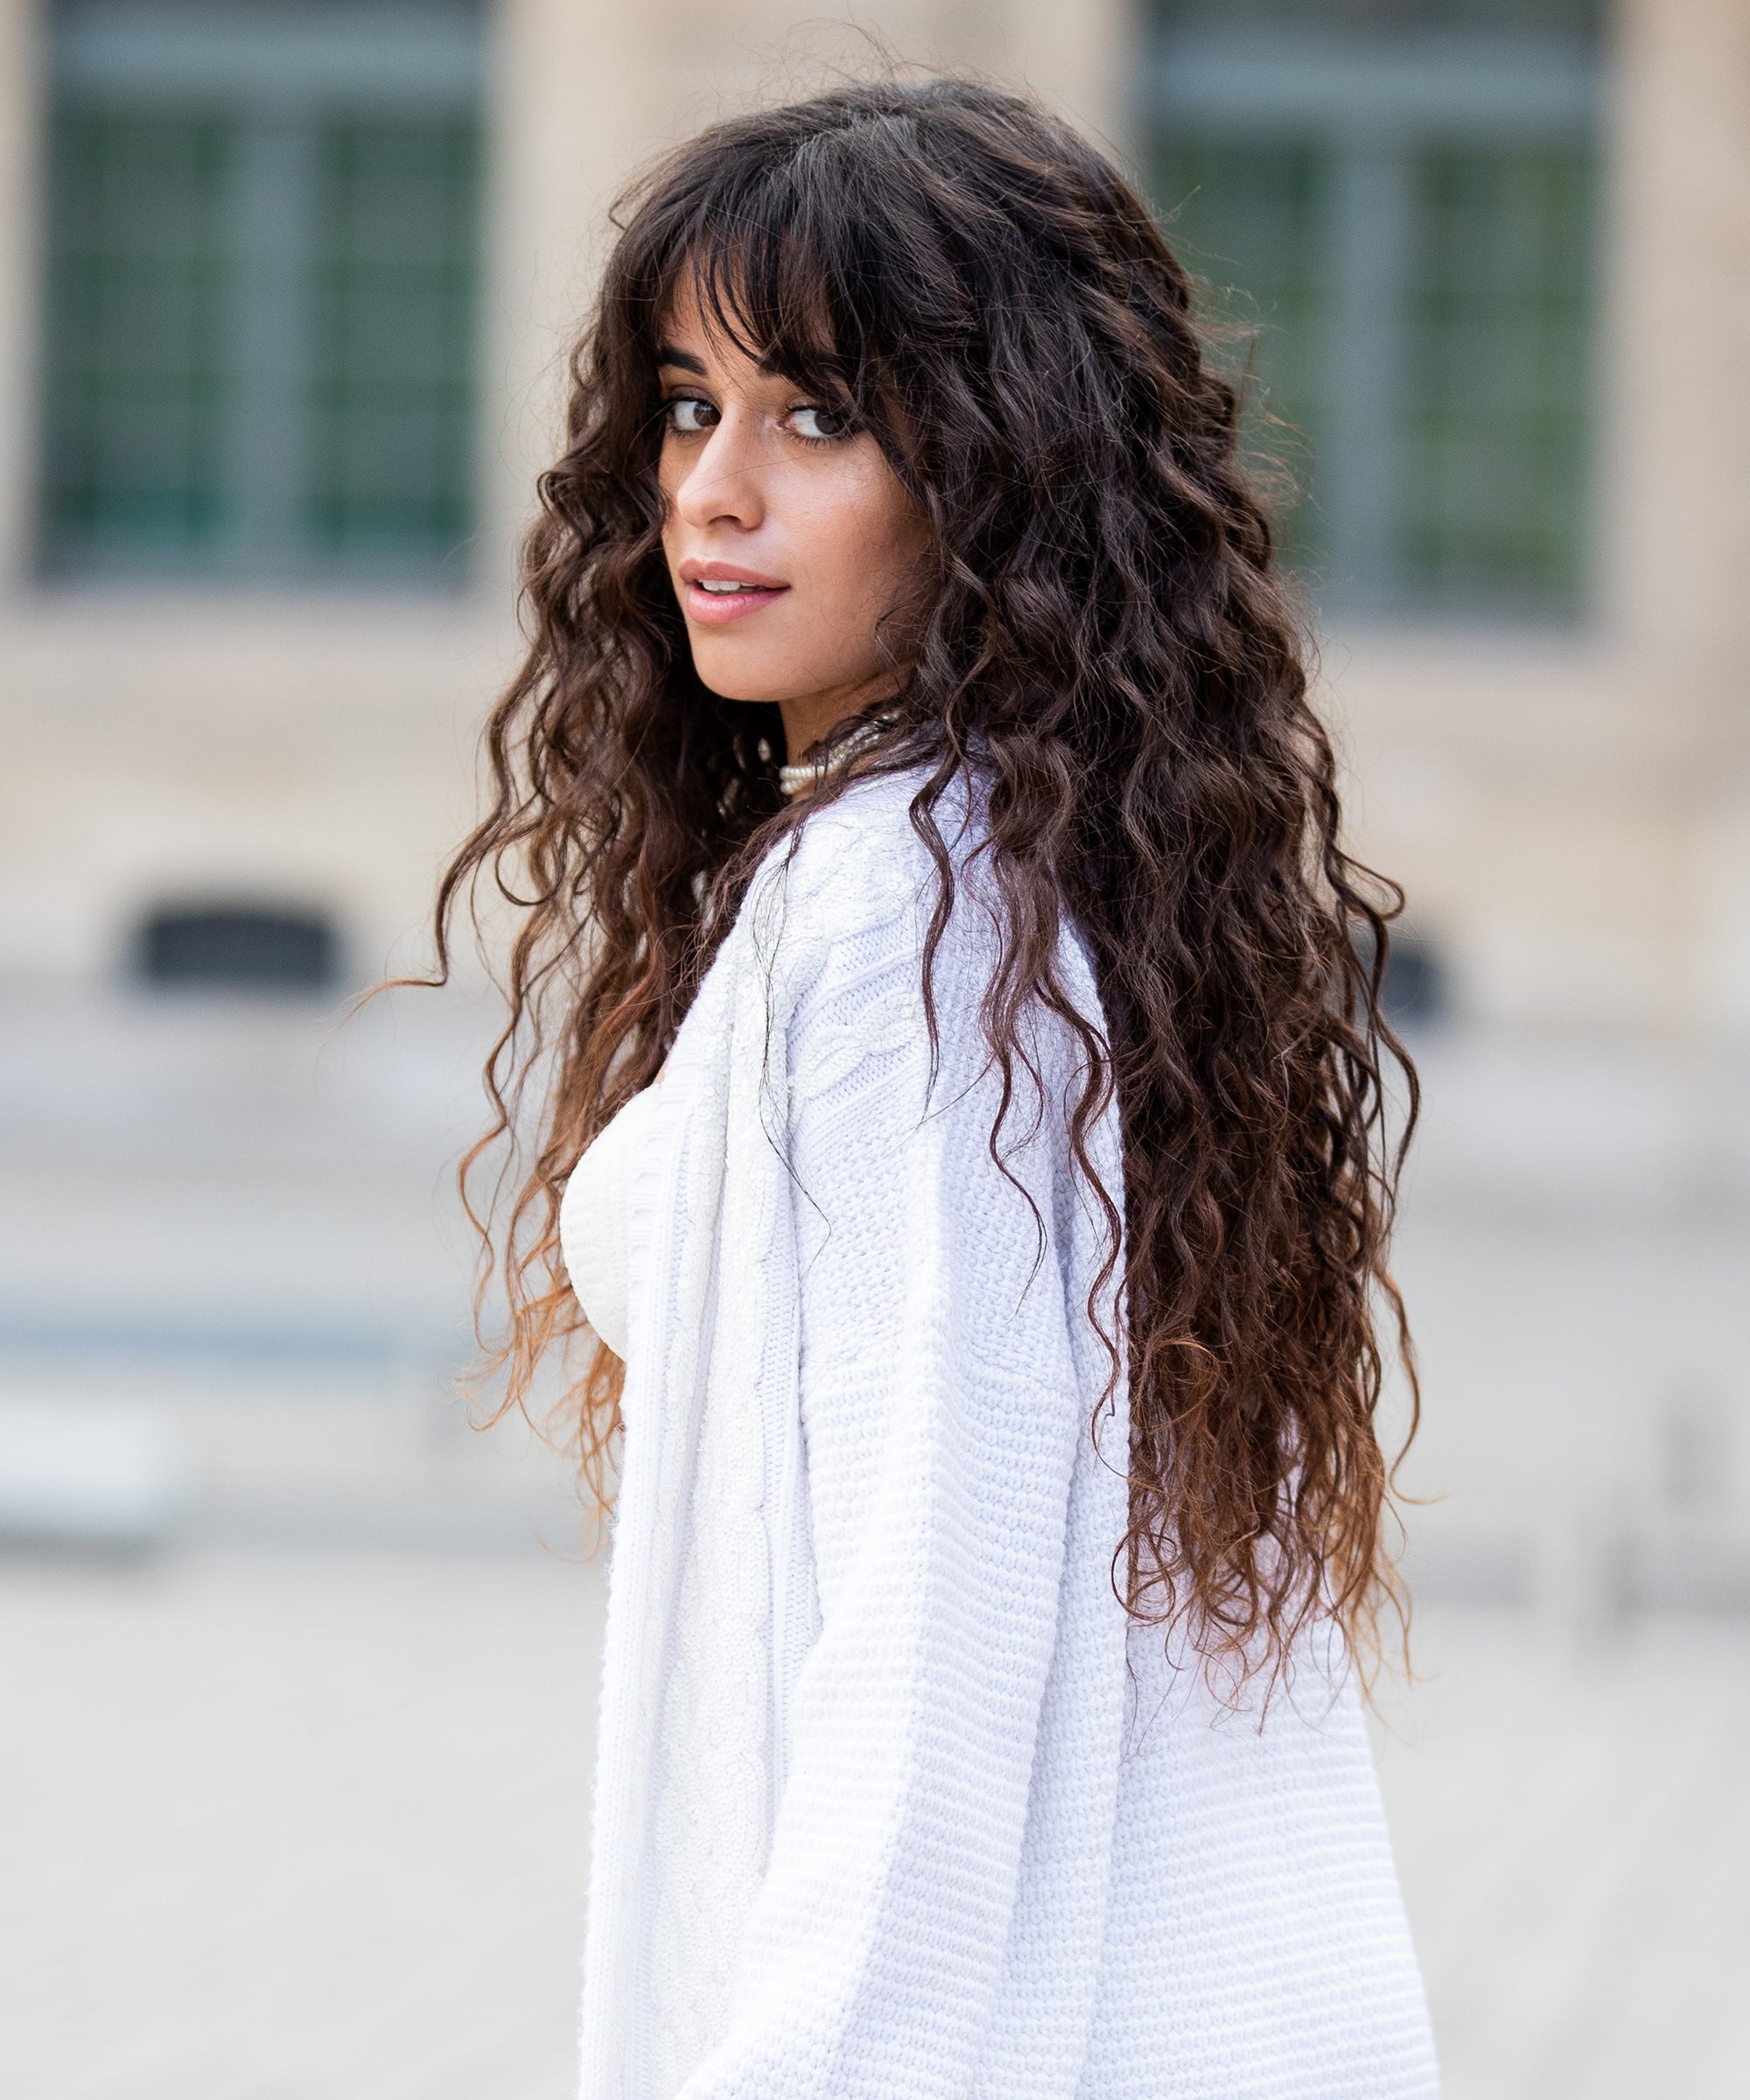 Paris, France -February 27, 2019: Street style outfit - Camila